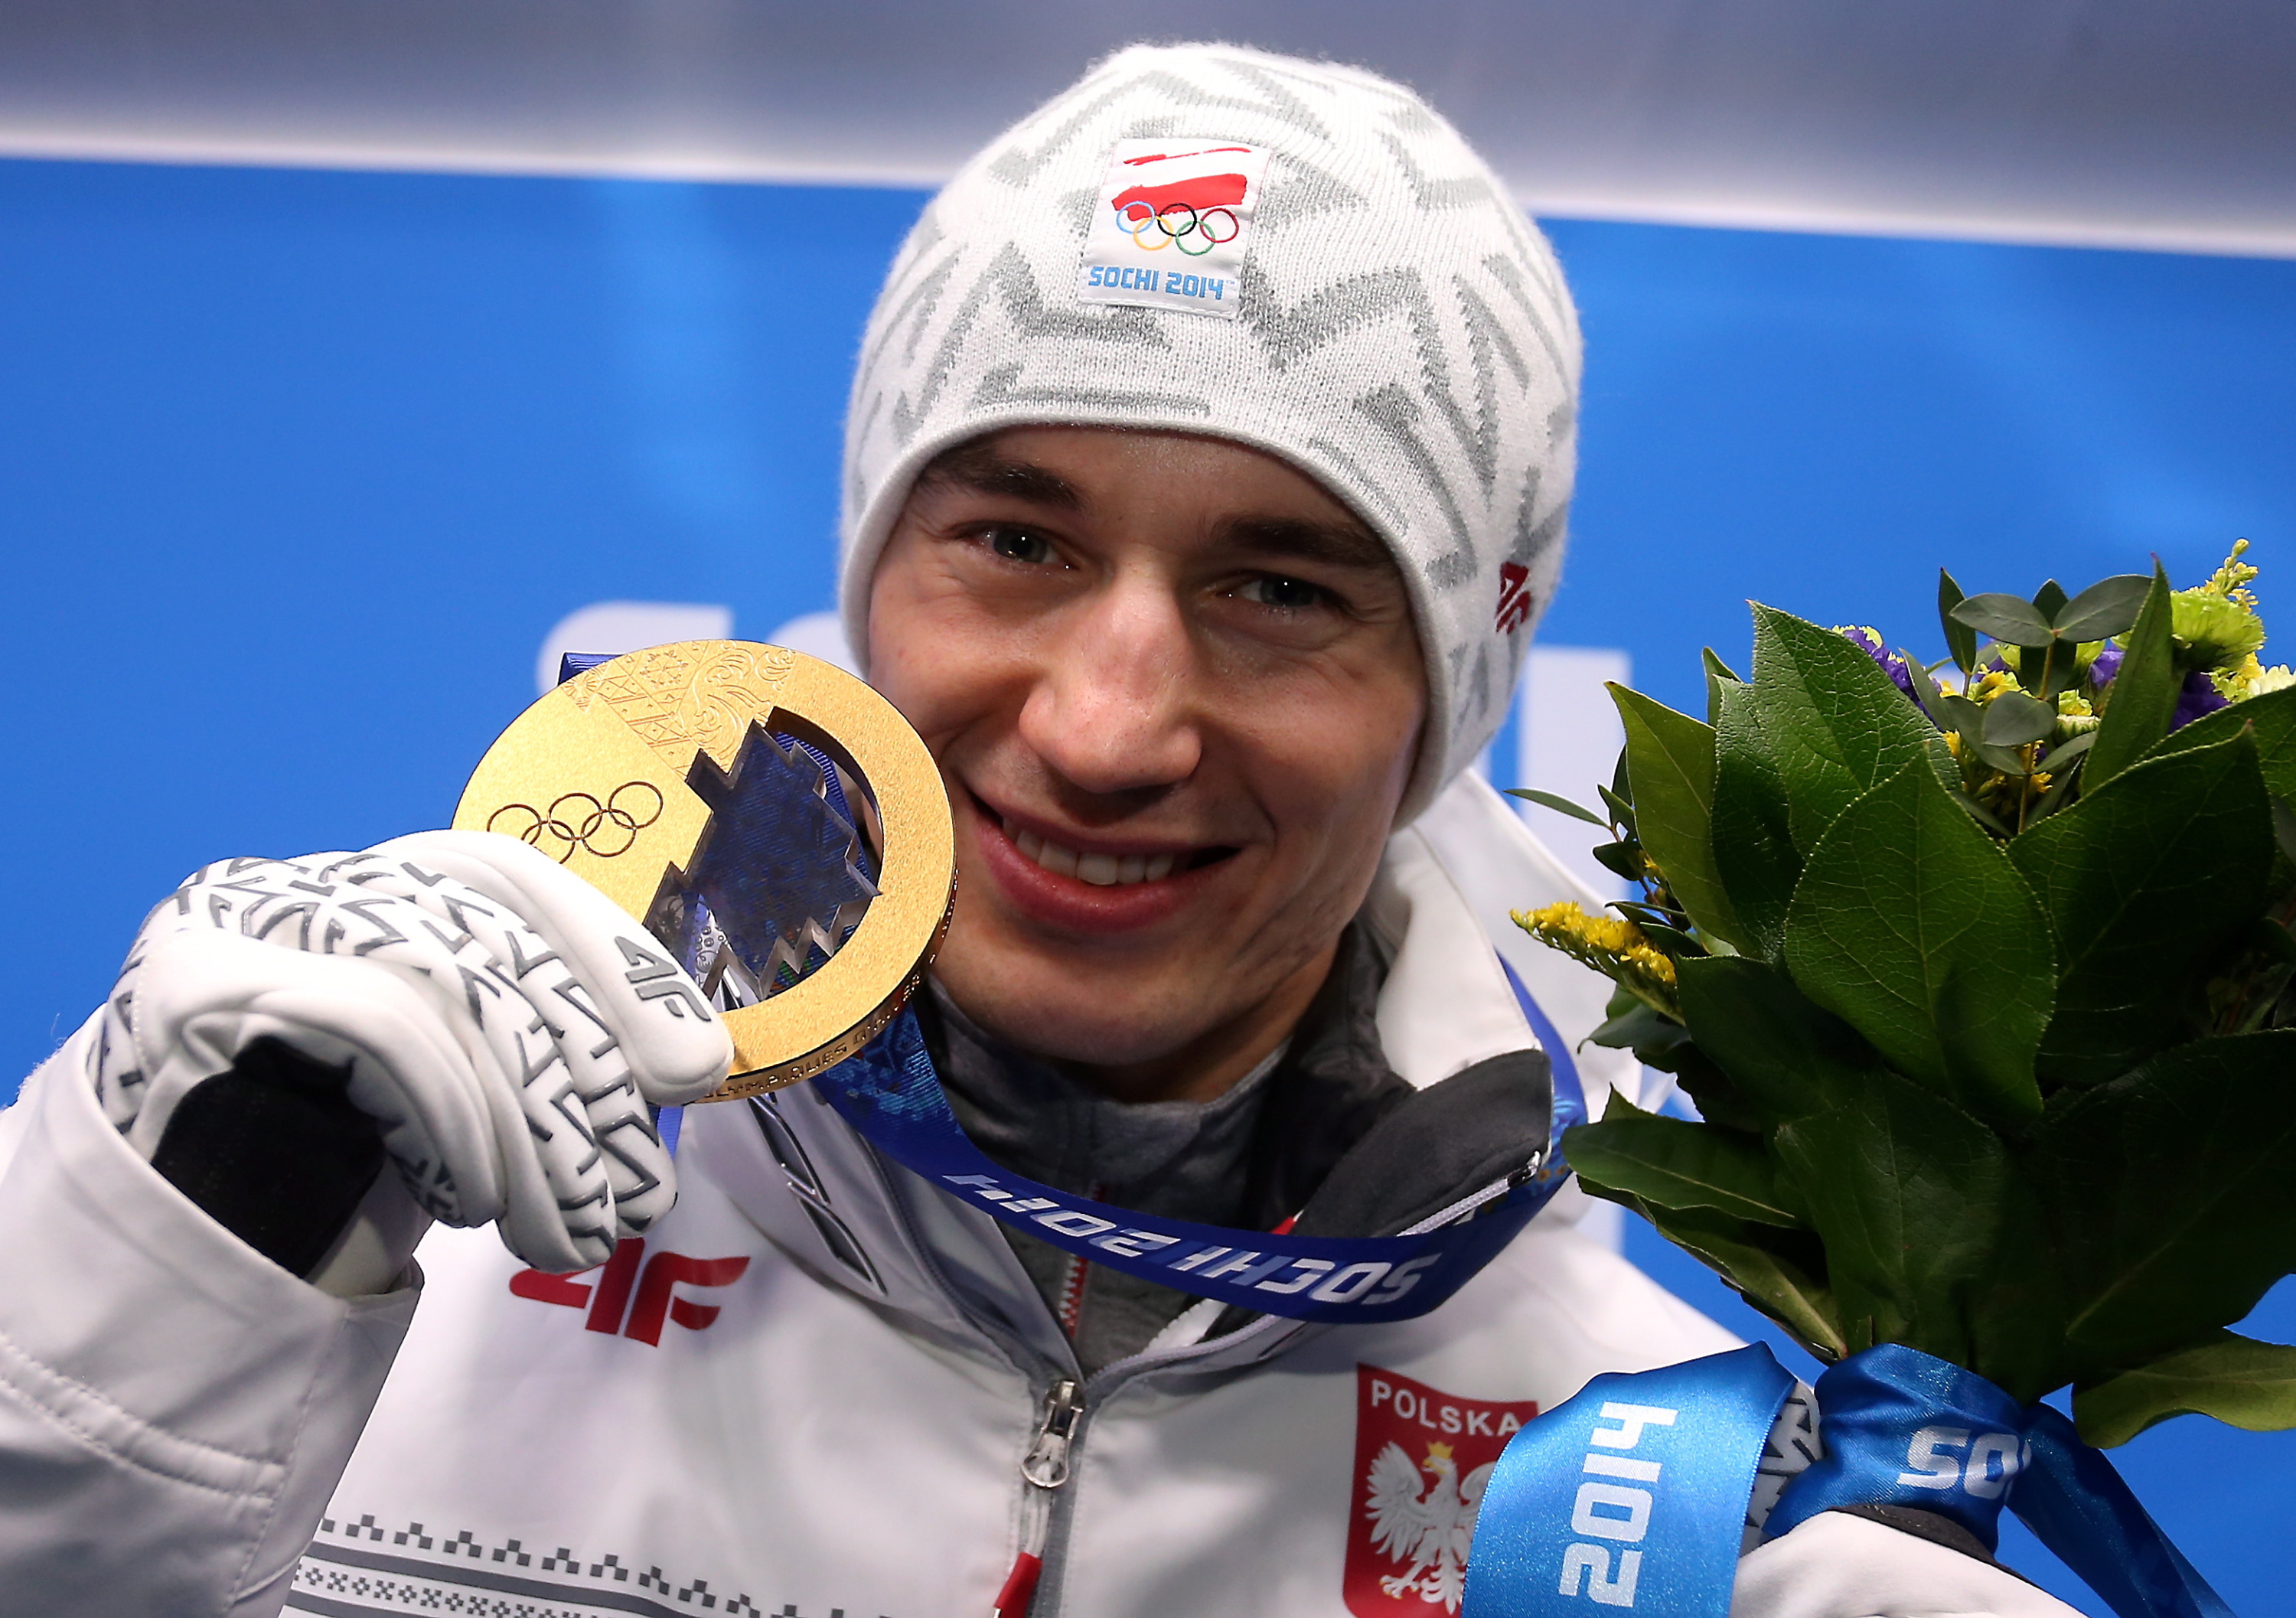 Kamil Stoch Pics, Sports Collection